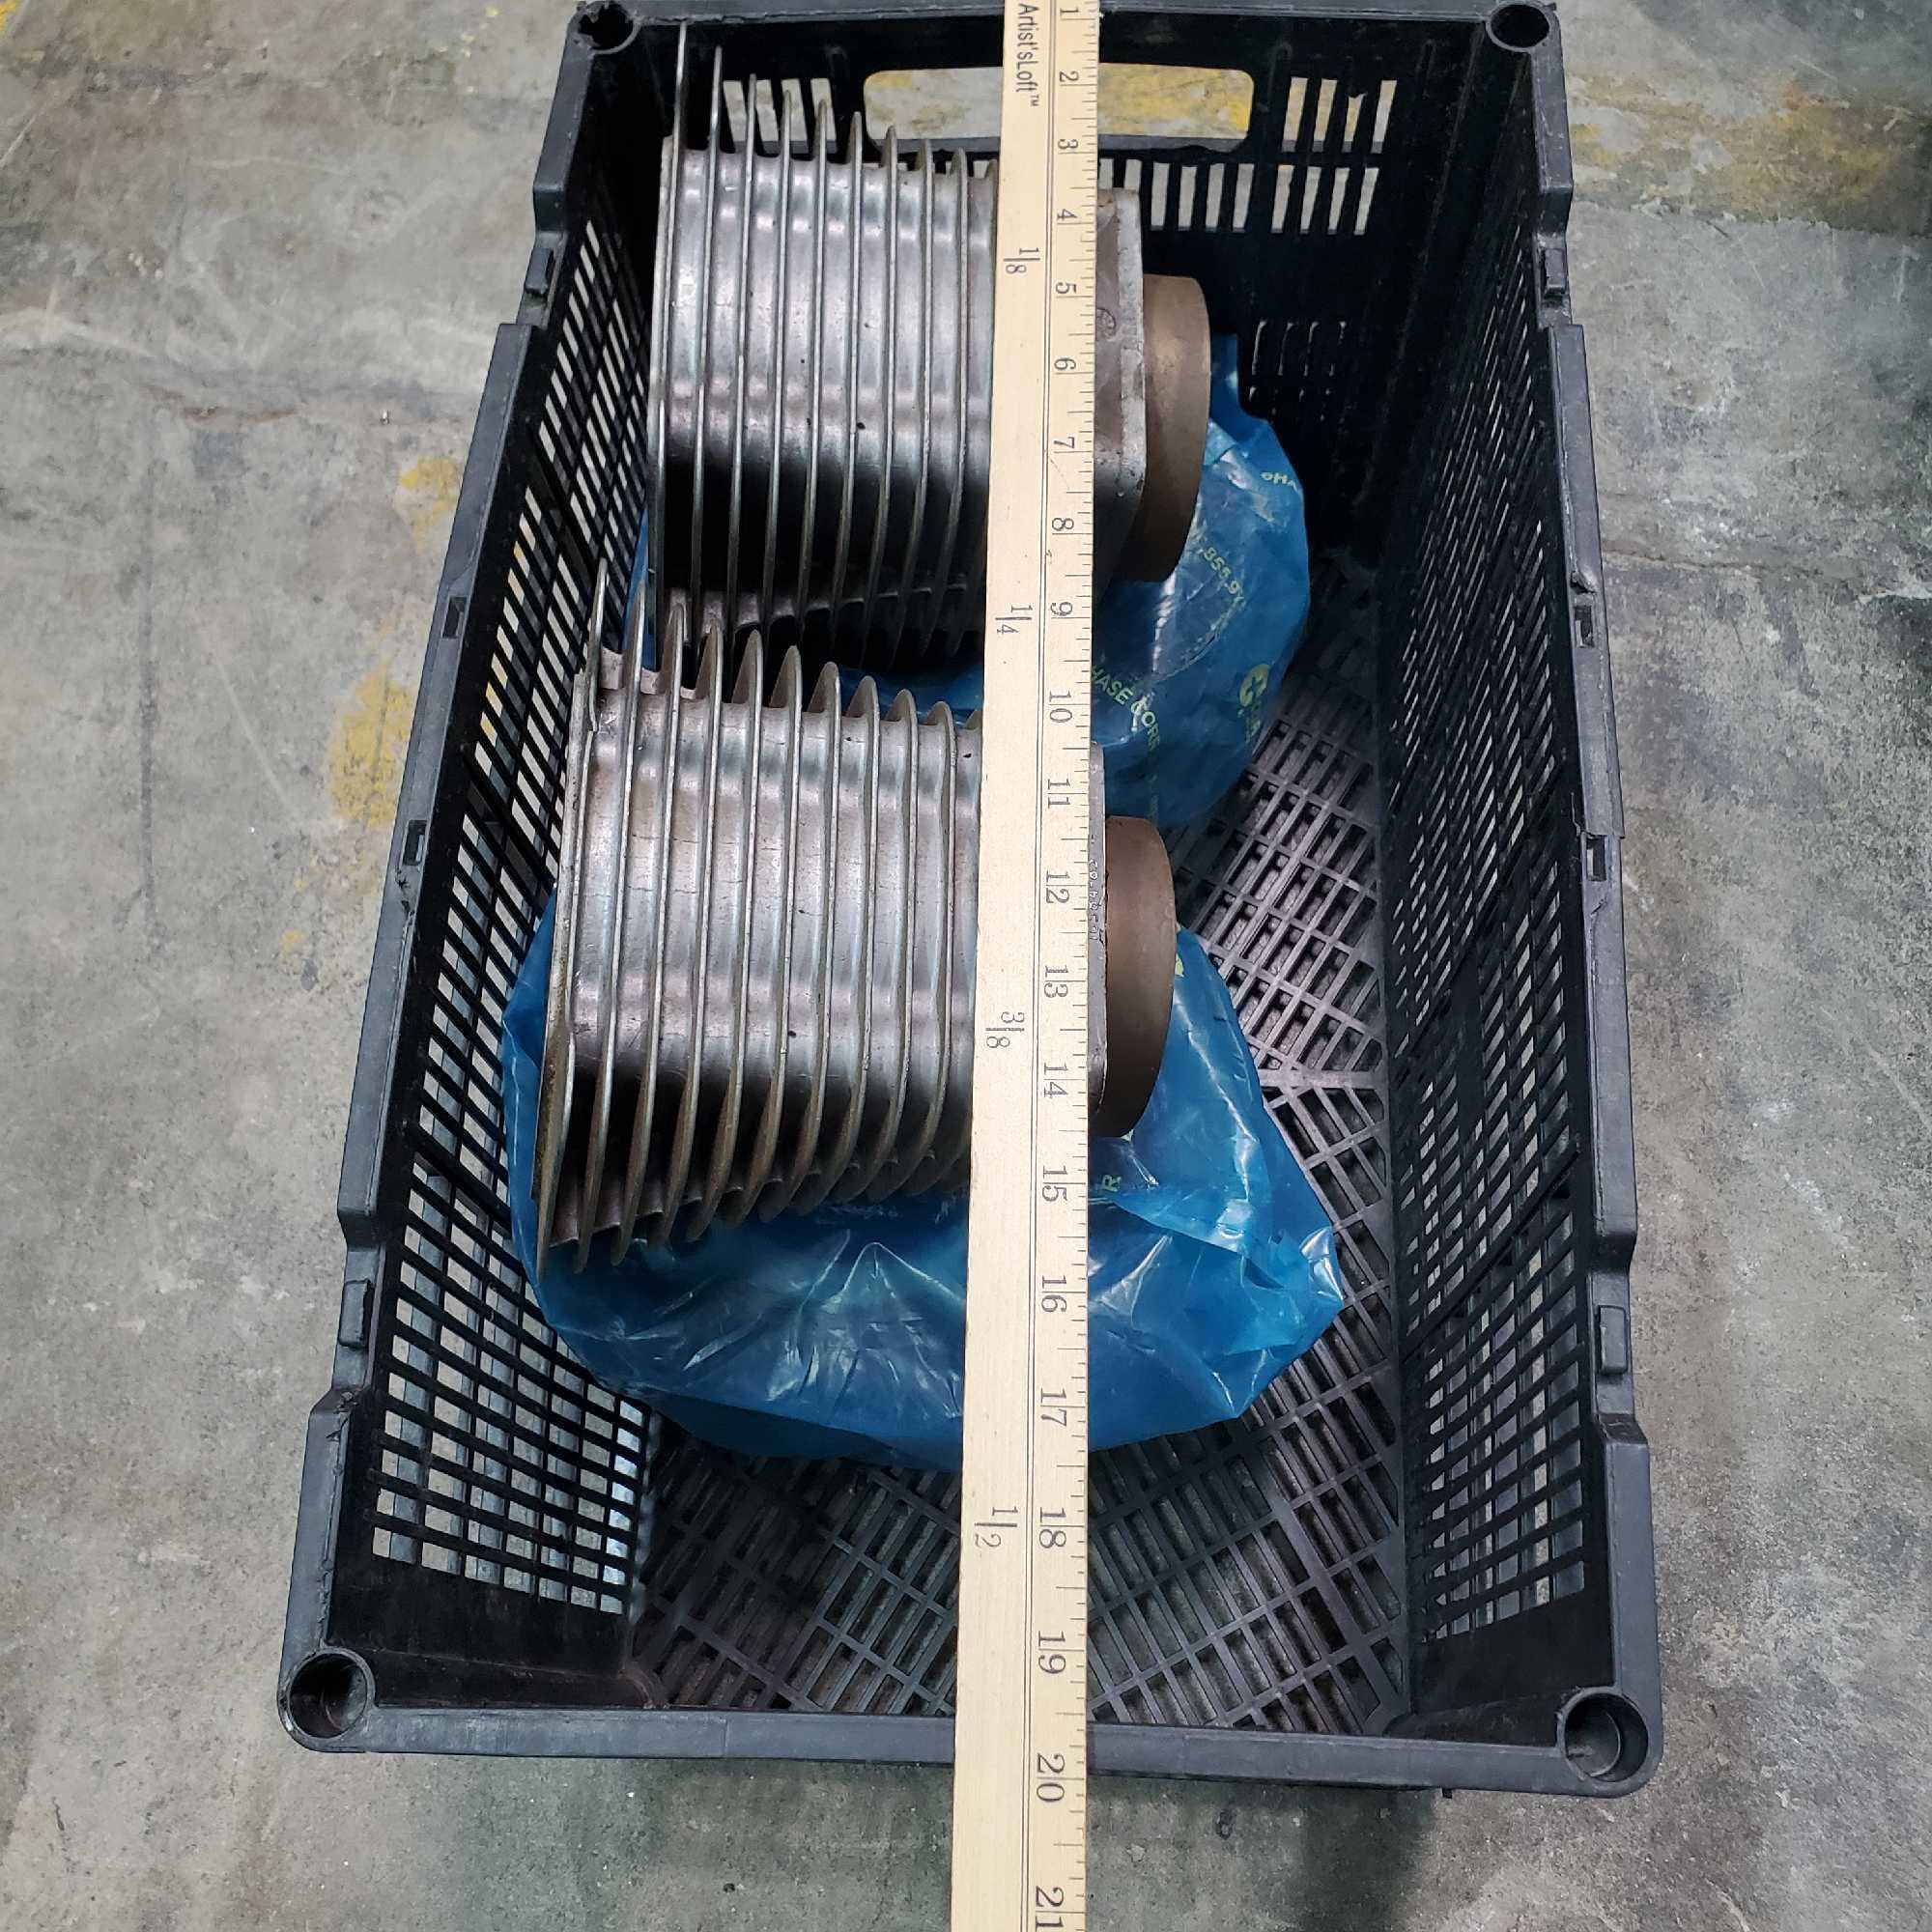 Crate with 4 Harley Davidson motorcycle cylinders